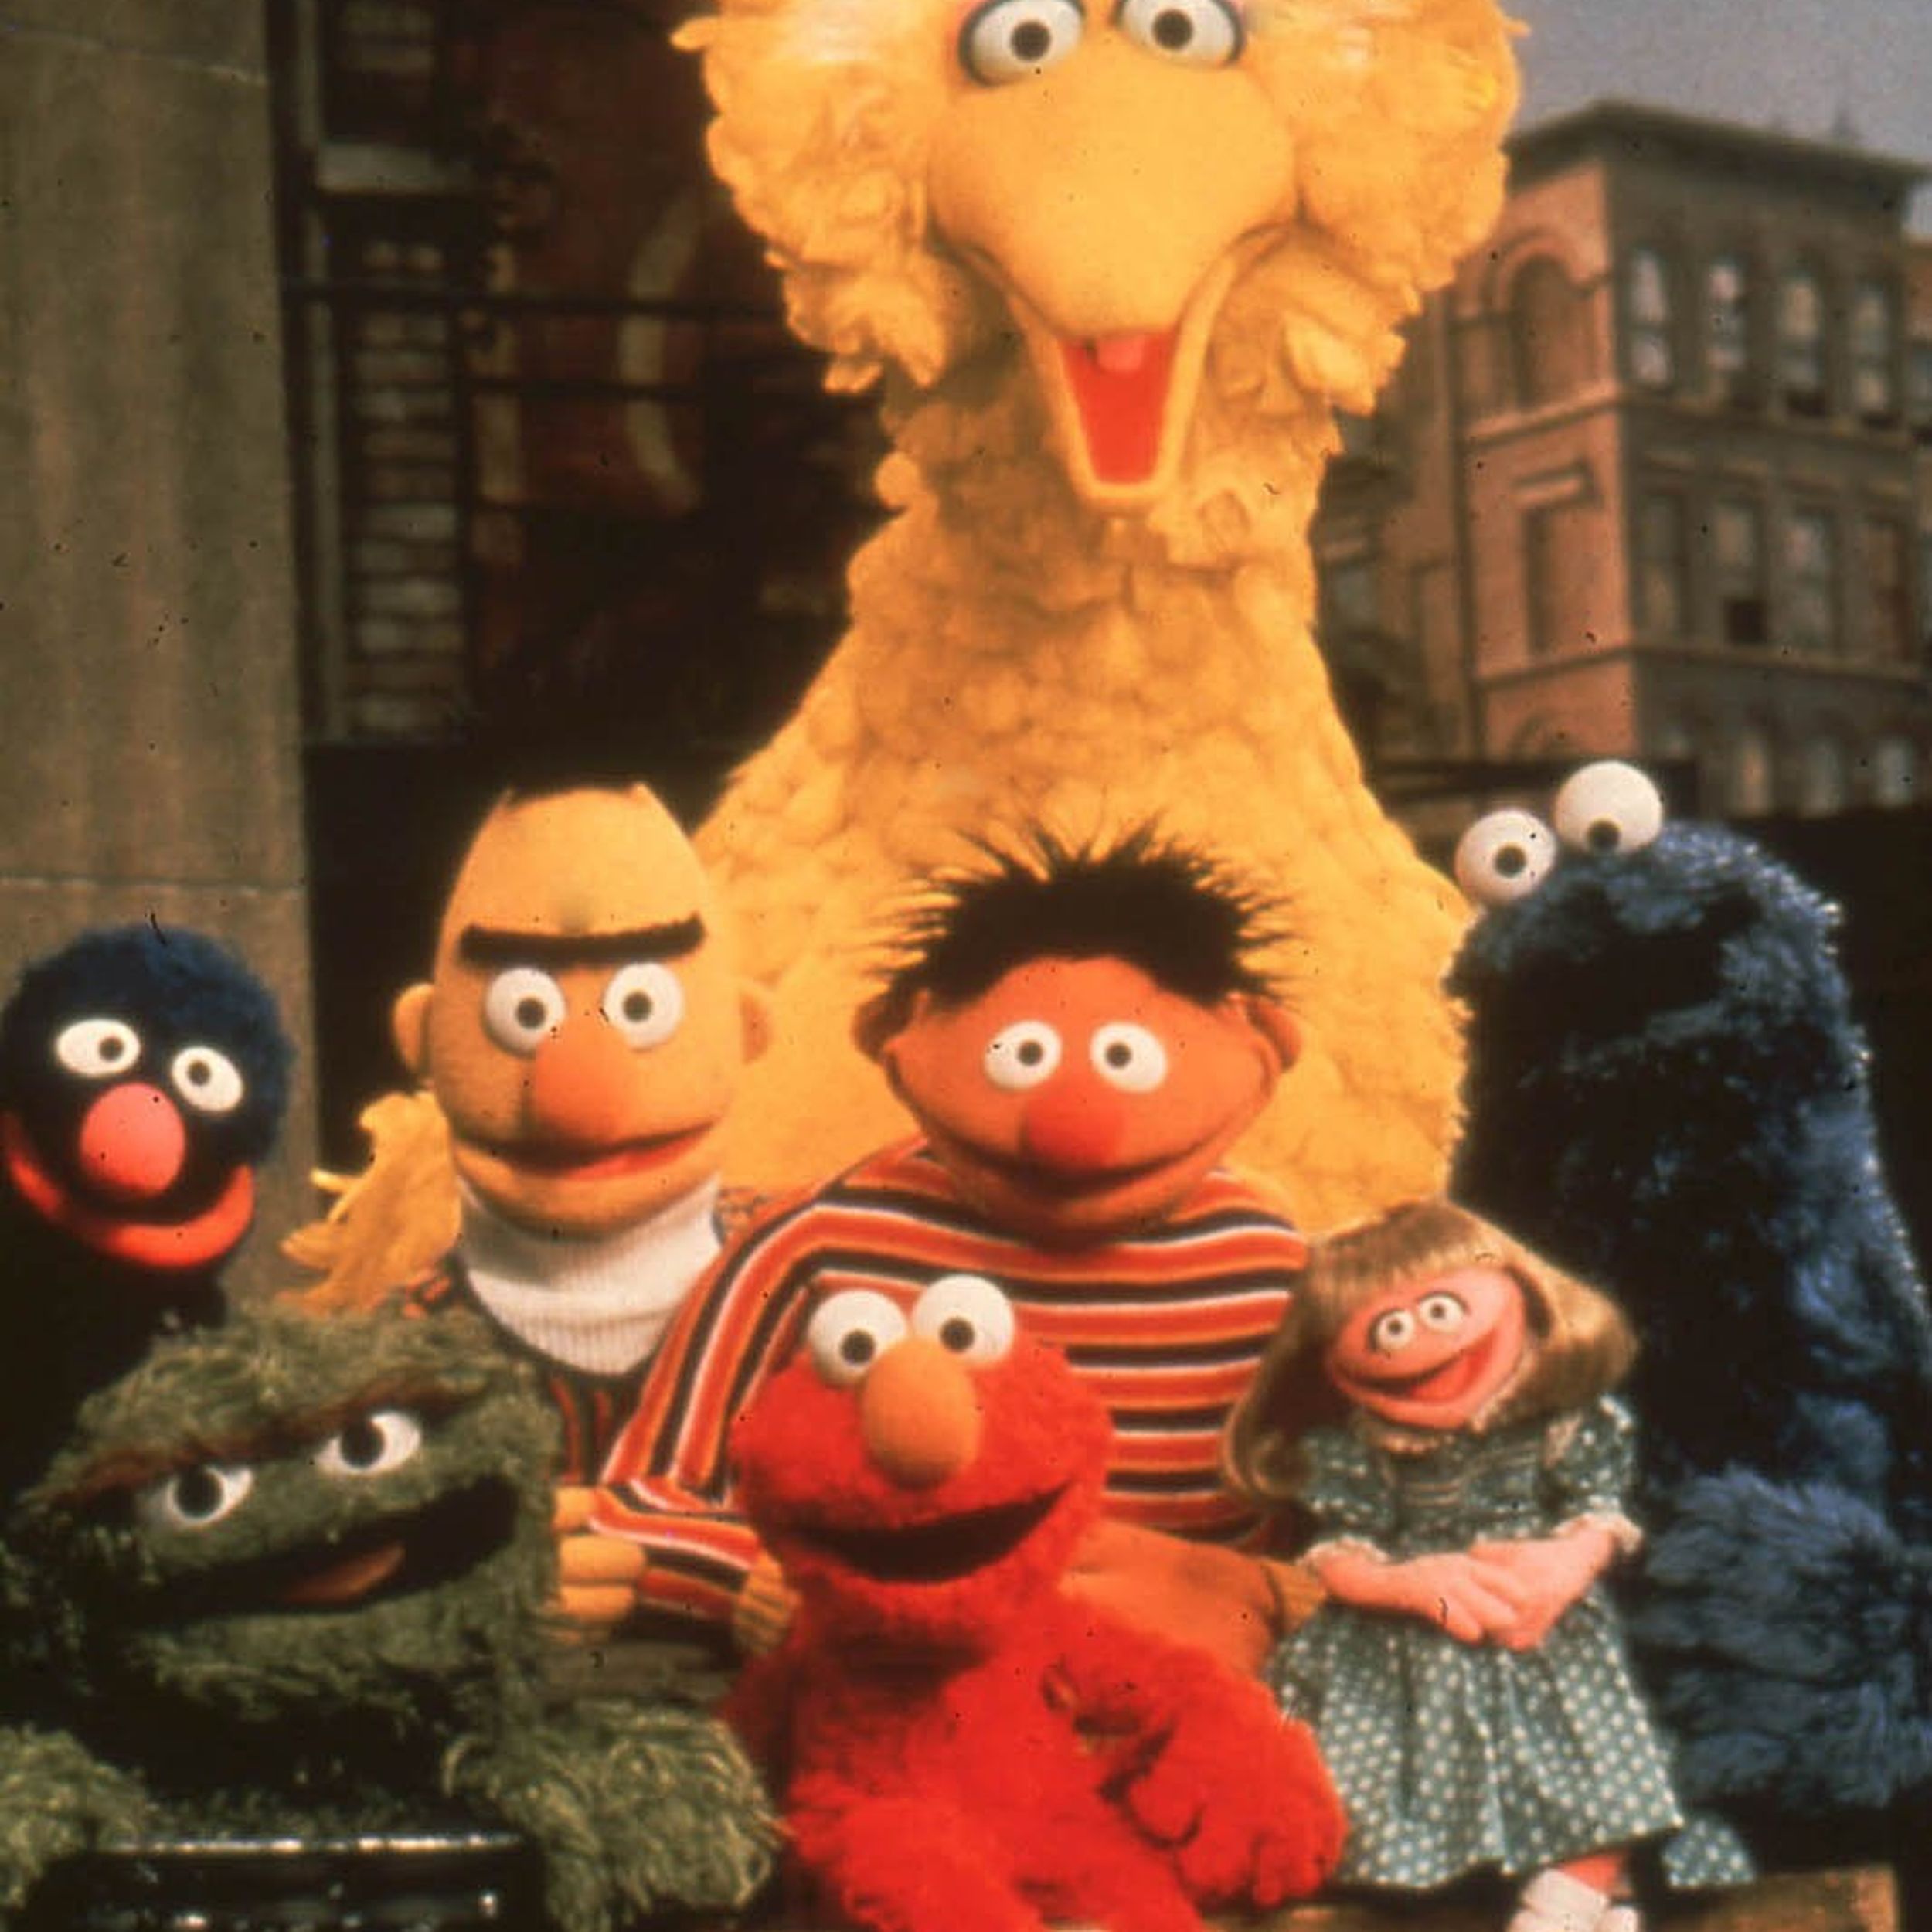 Missing 'Sesame Street' episodes continue HBO Max shakeup - Los